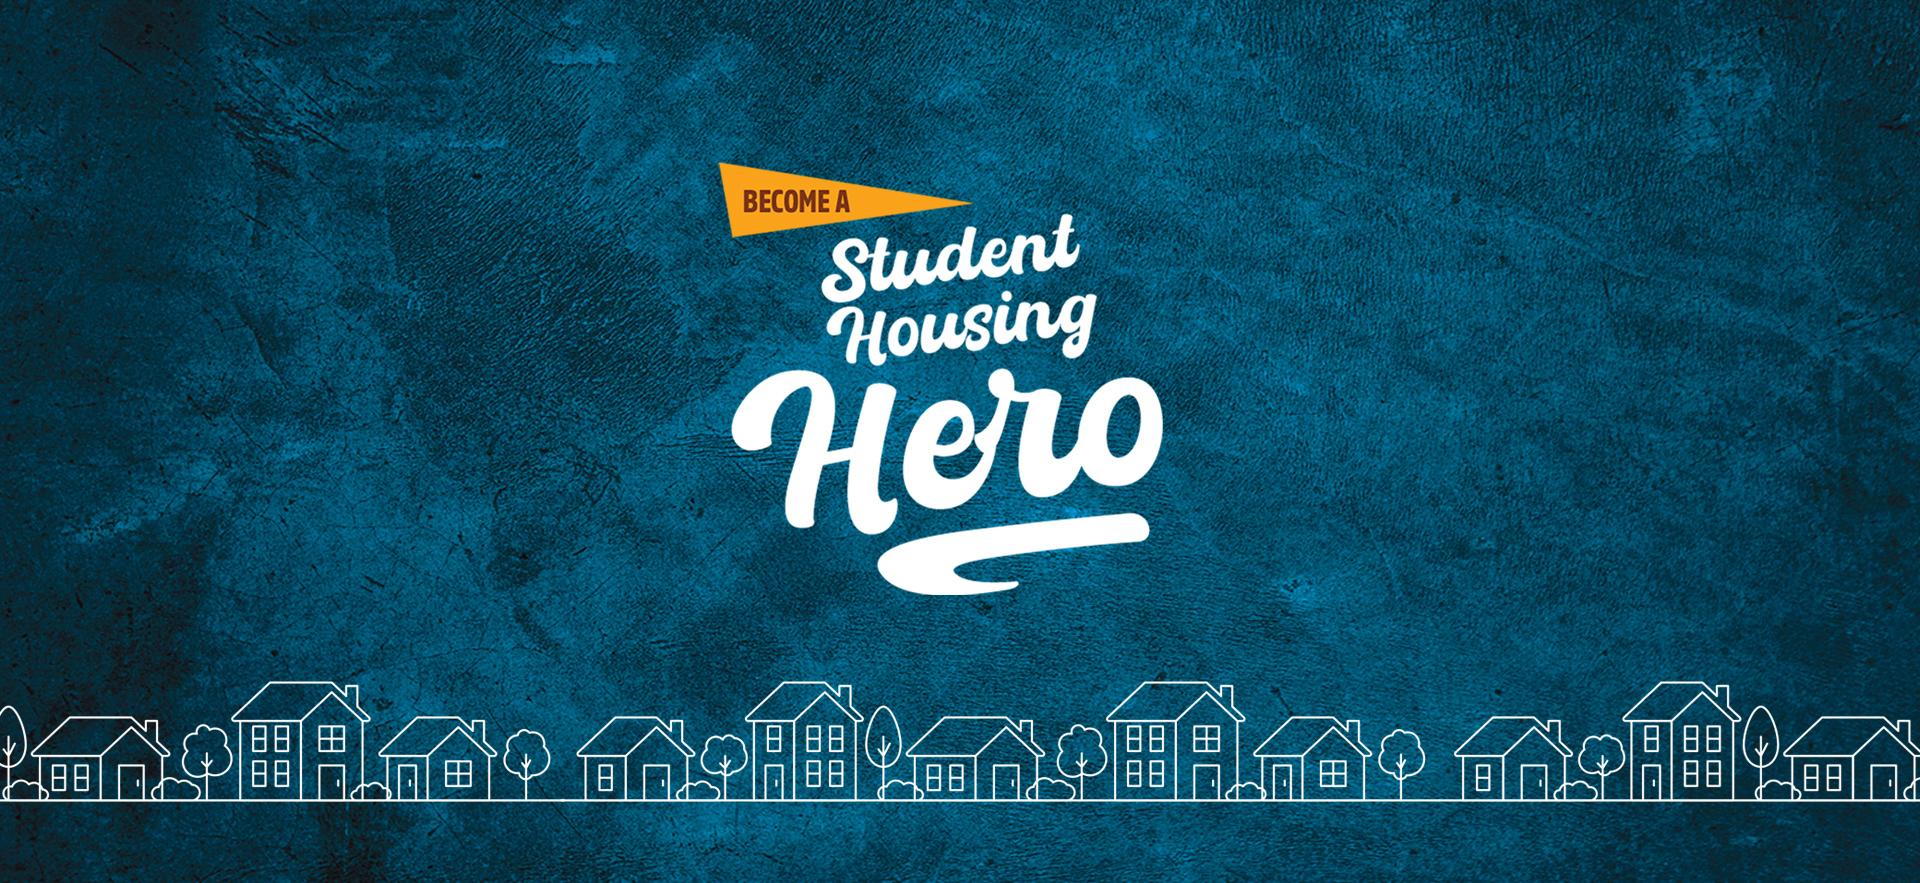 Become a student housing Hero